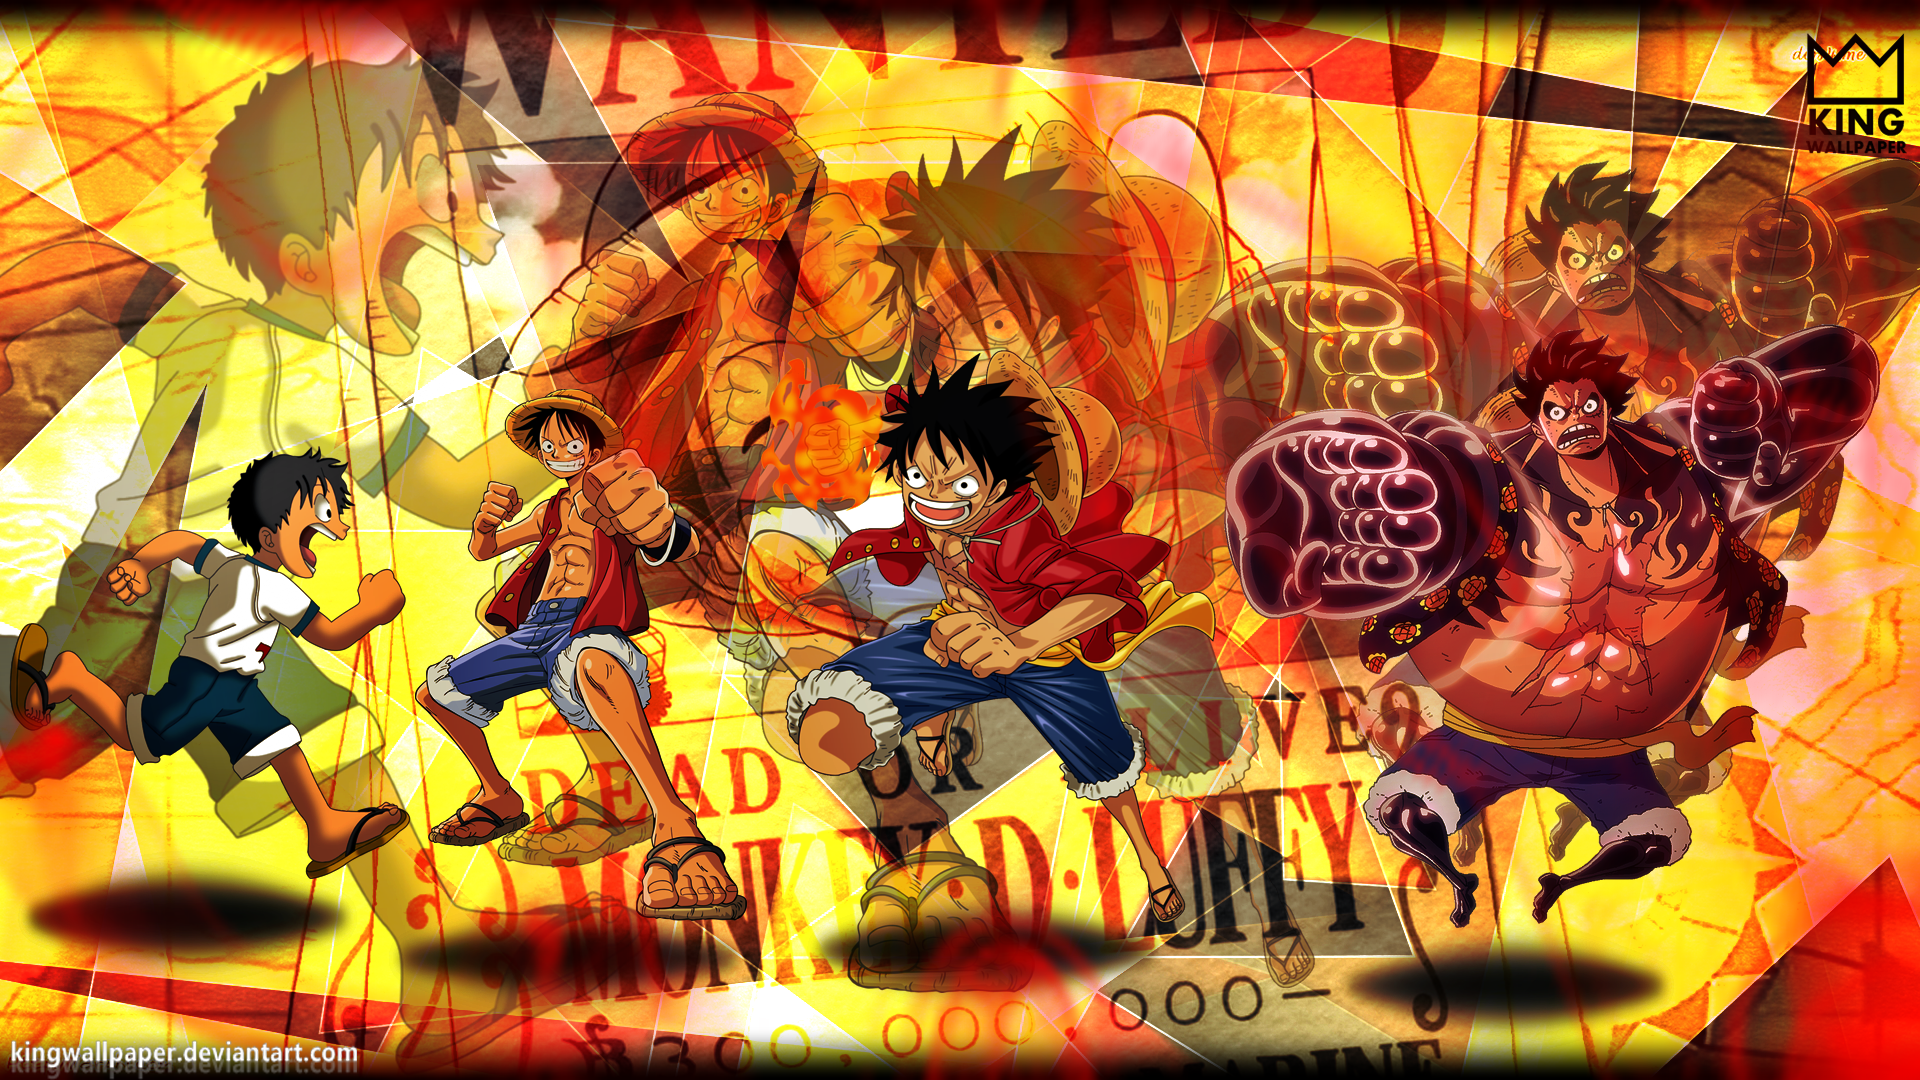 Haki (One Piece) HD Wallpapers and Backgrounds